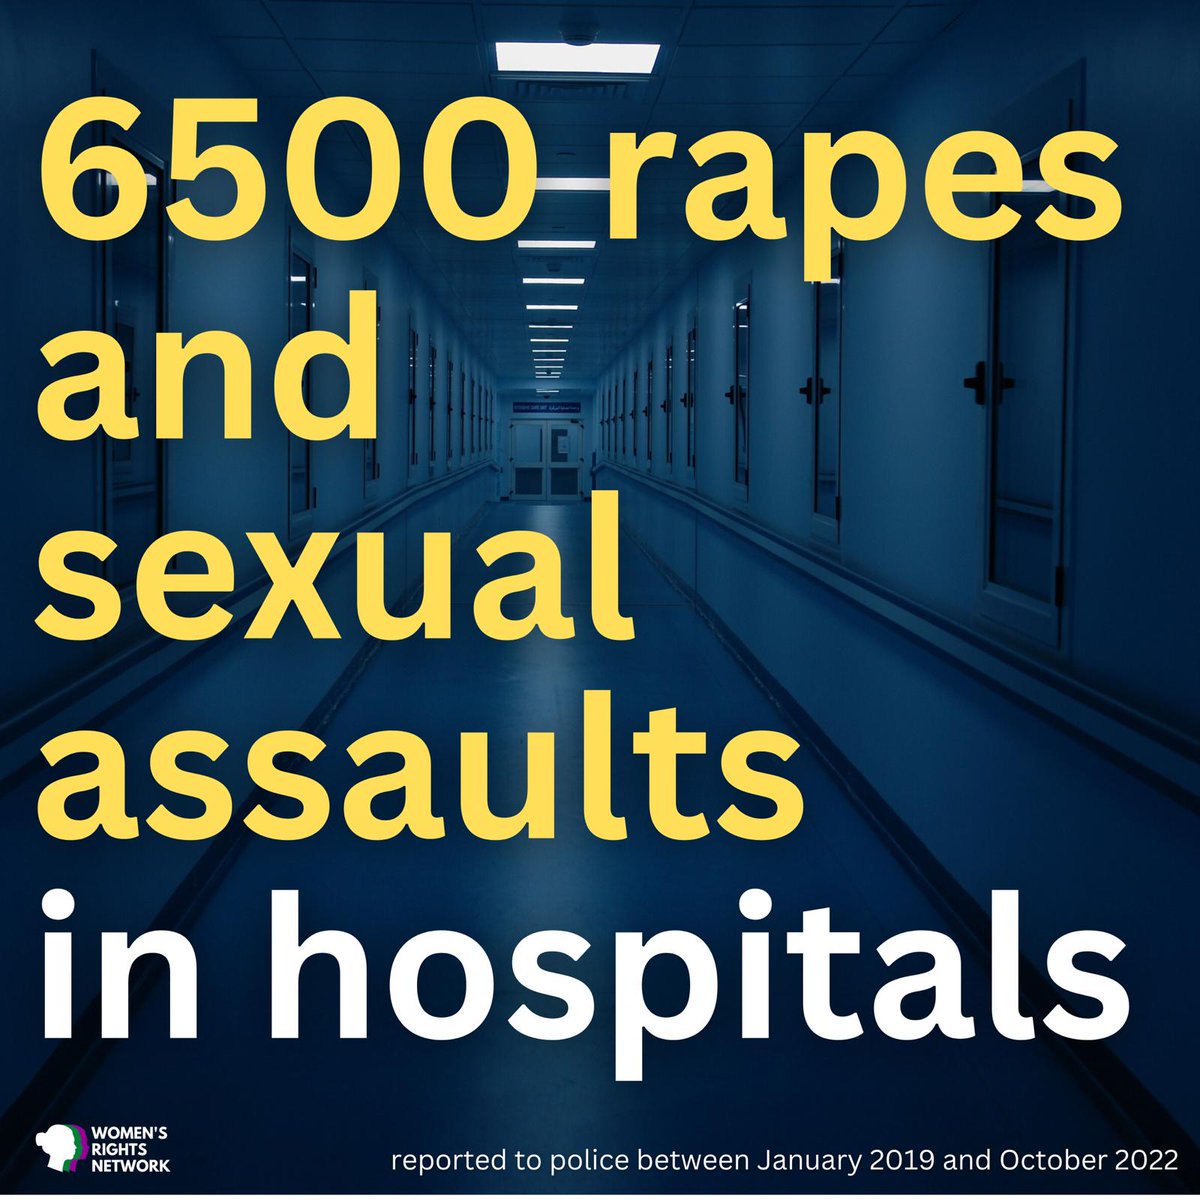 Catch @HeatherB_WRN discussing our disturbing report on Sexual Assaults in Hospitals.
womensrights.network/hospital-report
Today 
3.40pm on
 @LBC  
4.15pm on @VanessaOnAir  @TalkTV 
4.35pm on
Jane @janegarvey1 & Fi @fifiglover
@TimesRadio
#StopHospitalRapes #NotAPlaceOfSafety